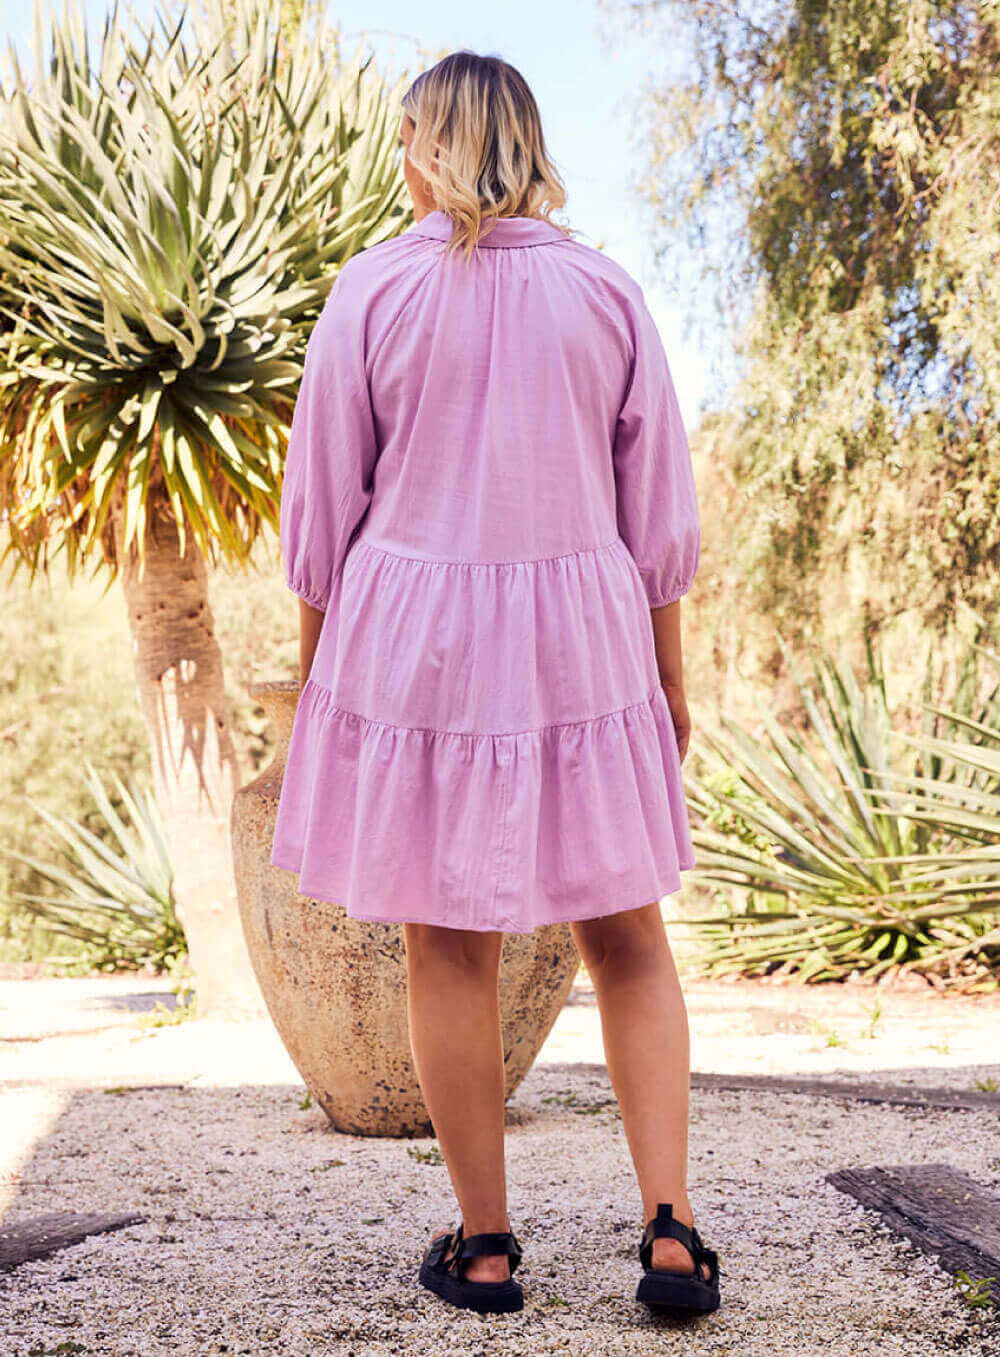 The Jasmine Dress in lilac is made of 100% soft cotton, featuring a collar neck, 3/4 sleeve with elastic cuff button through front all the way to the hem, tiered layers through the body, midi in length and 2 side pockets